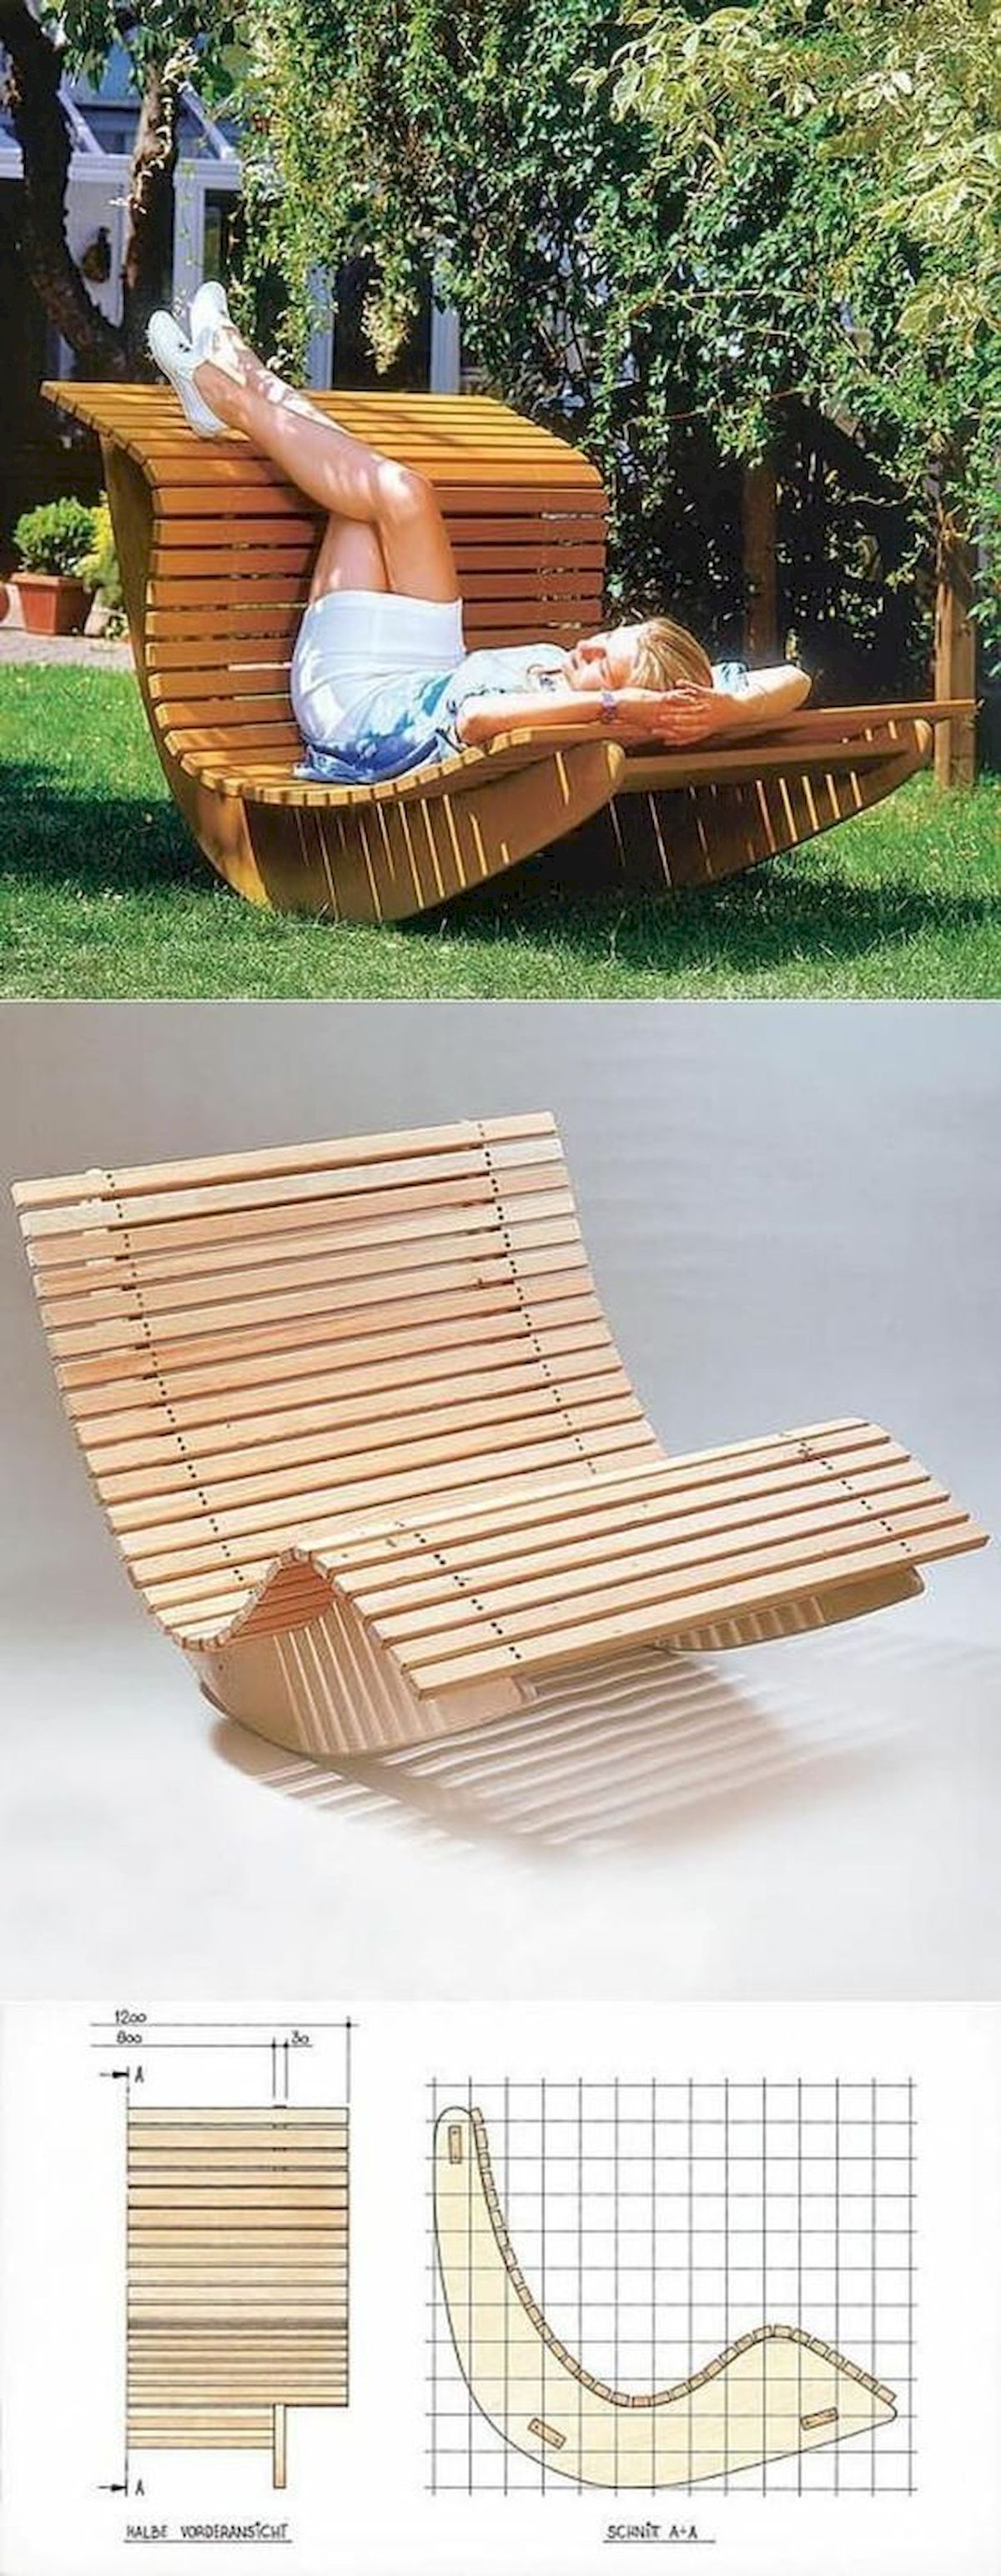 50 Amazing DIY Projects Outdoor Furniture Design Ideas (31)